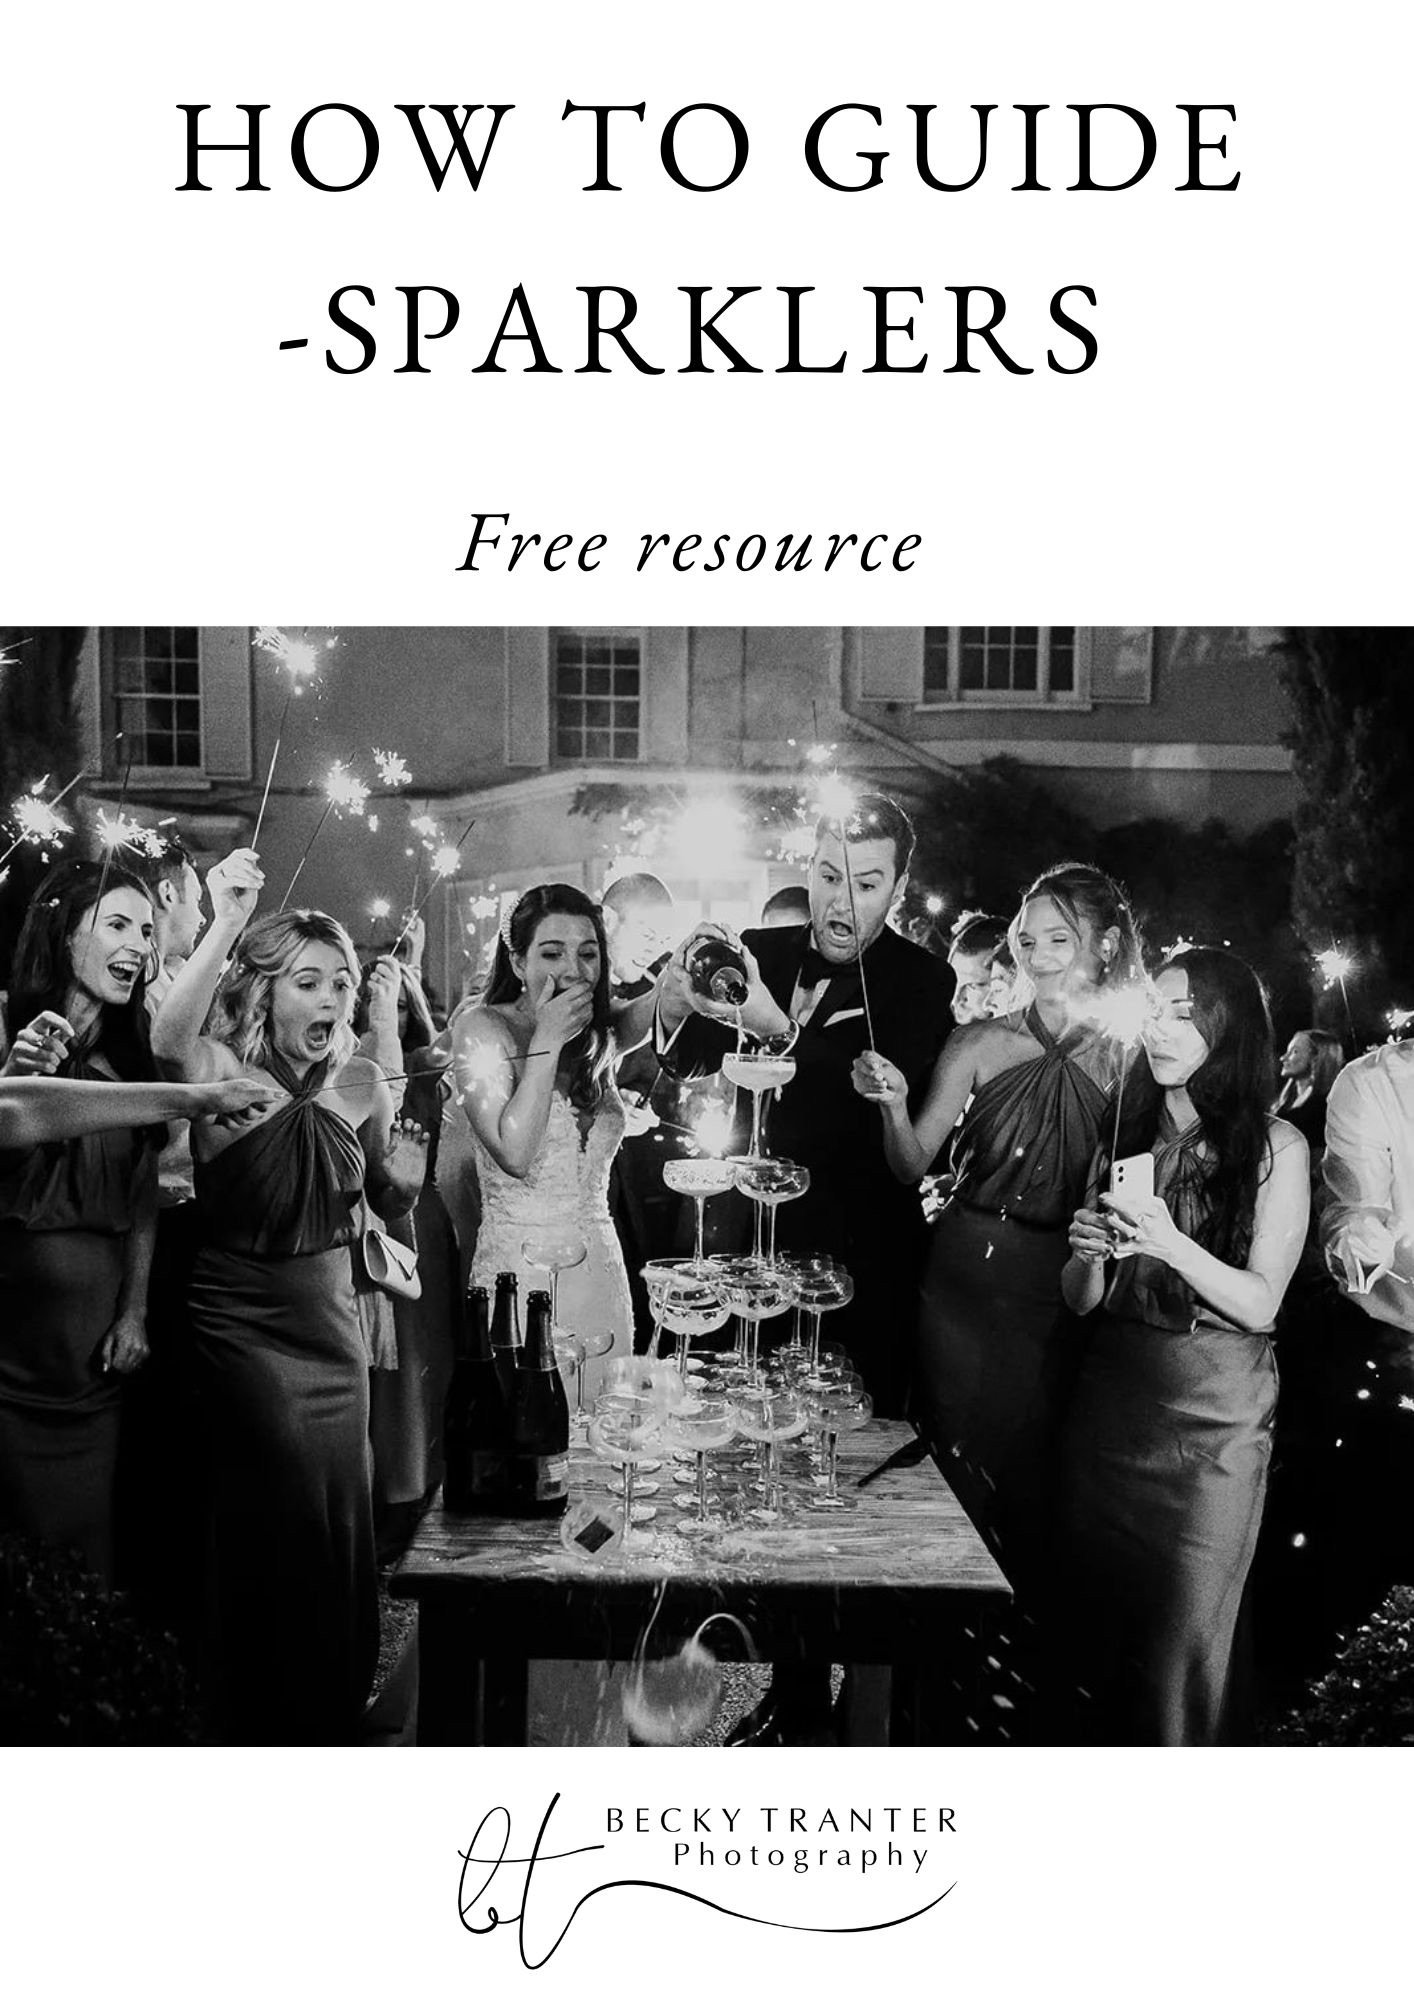 How to photograph sparklers